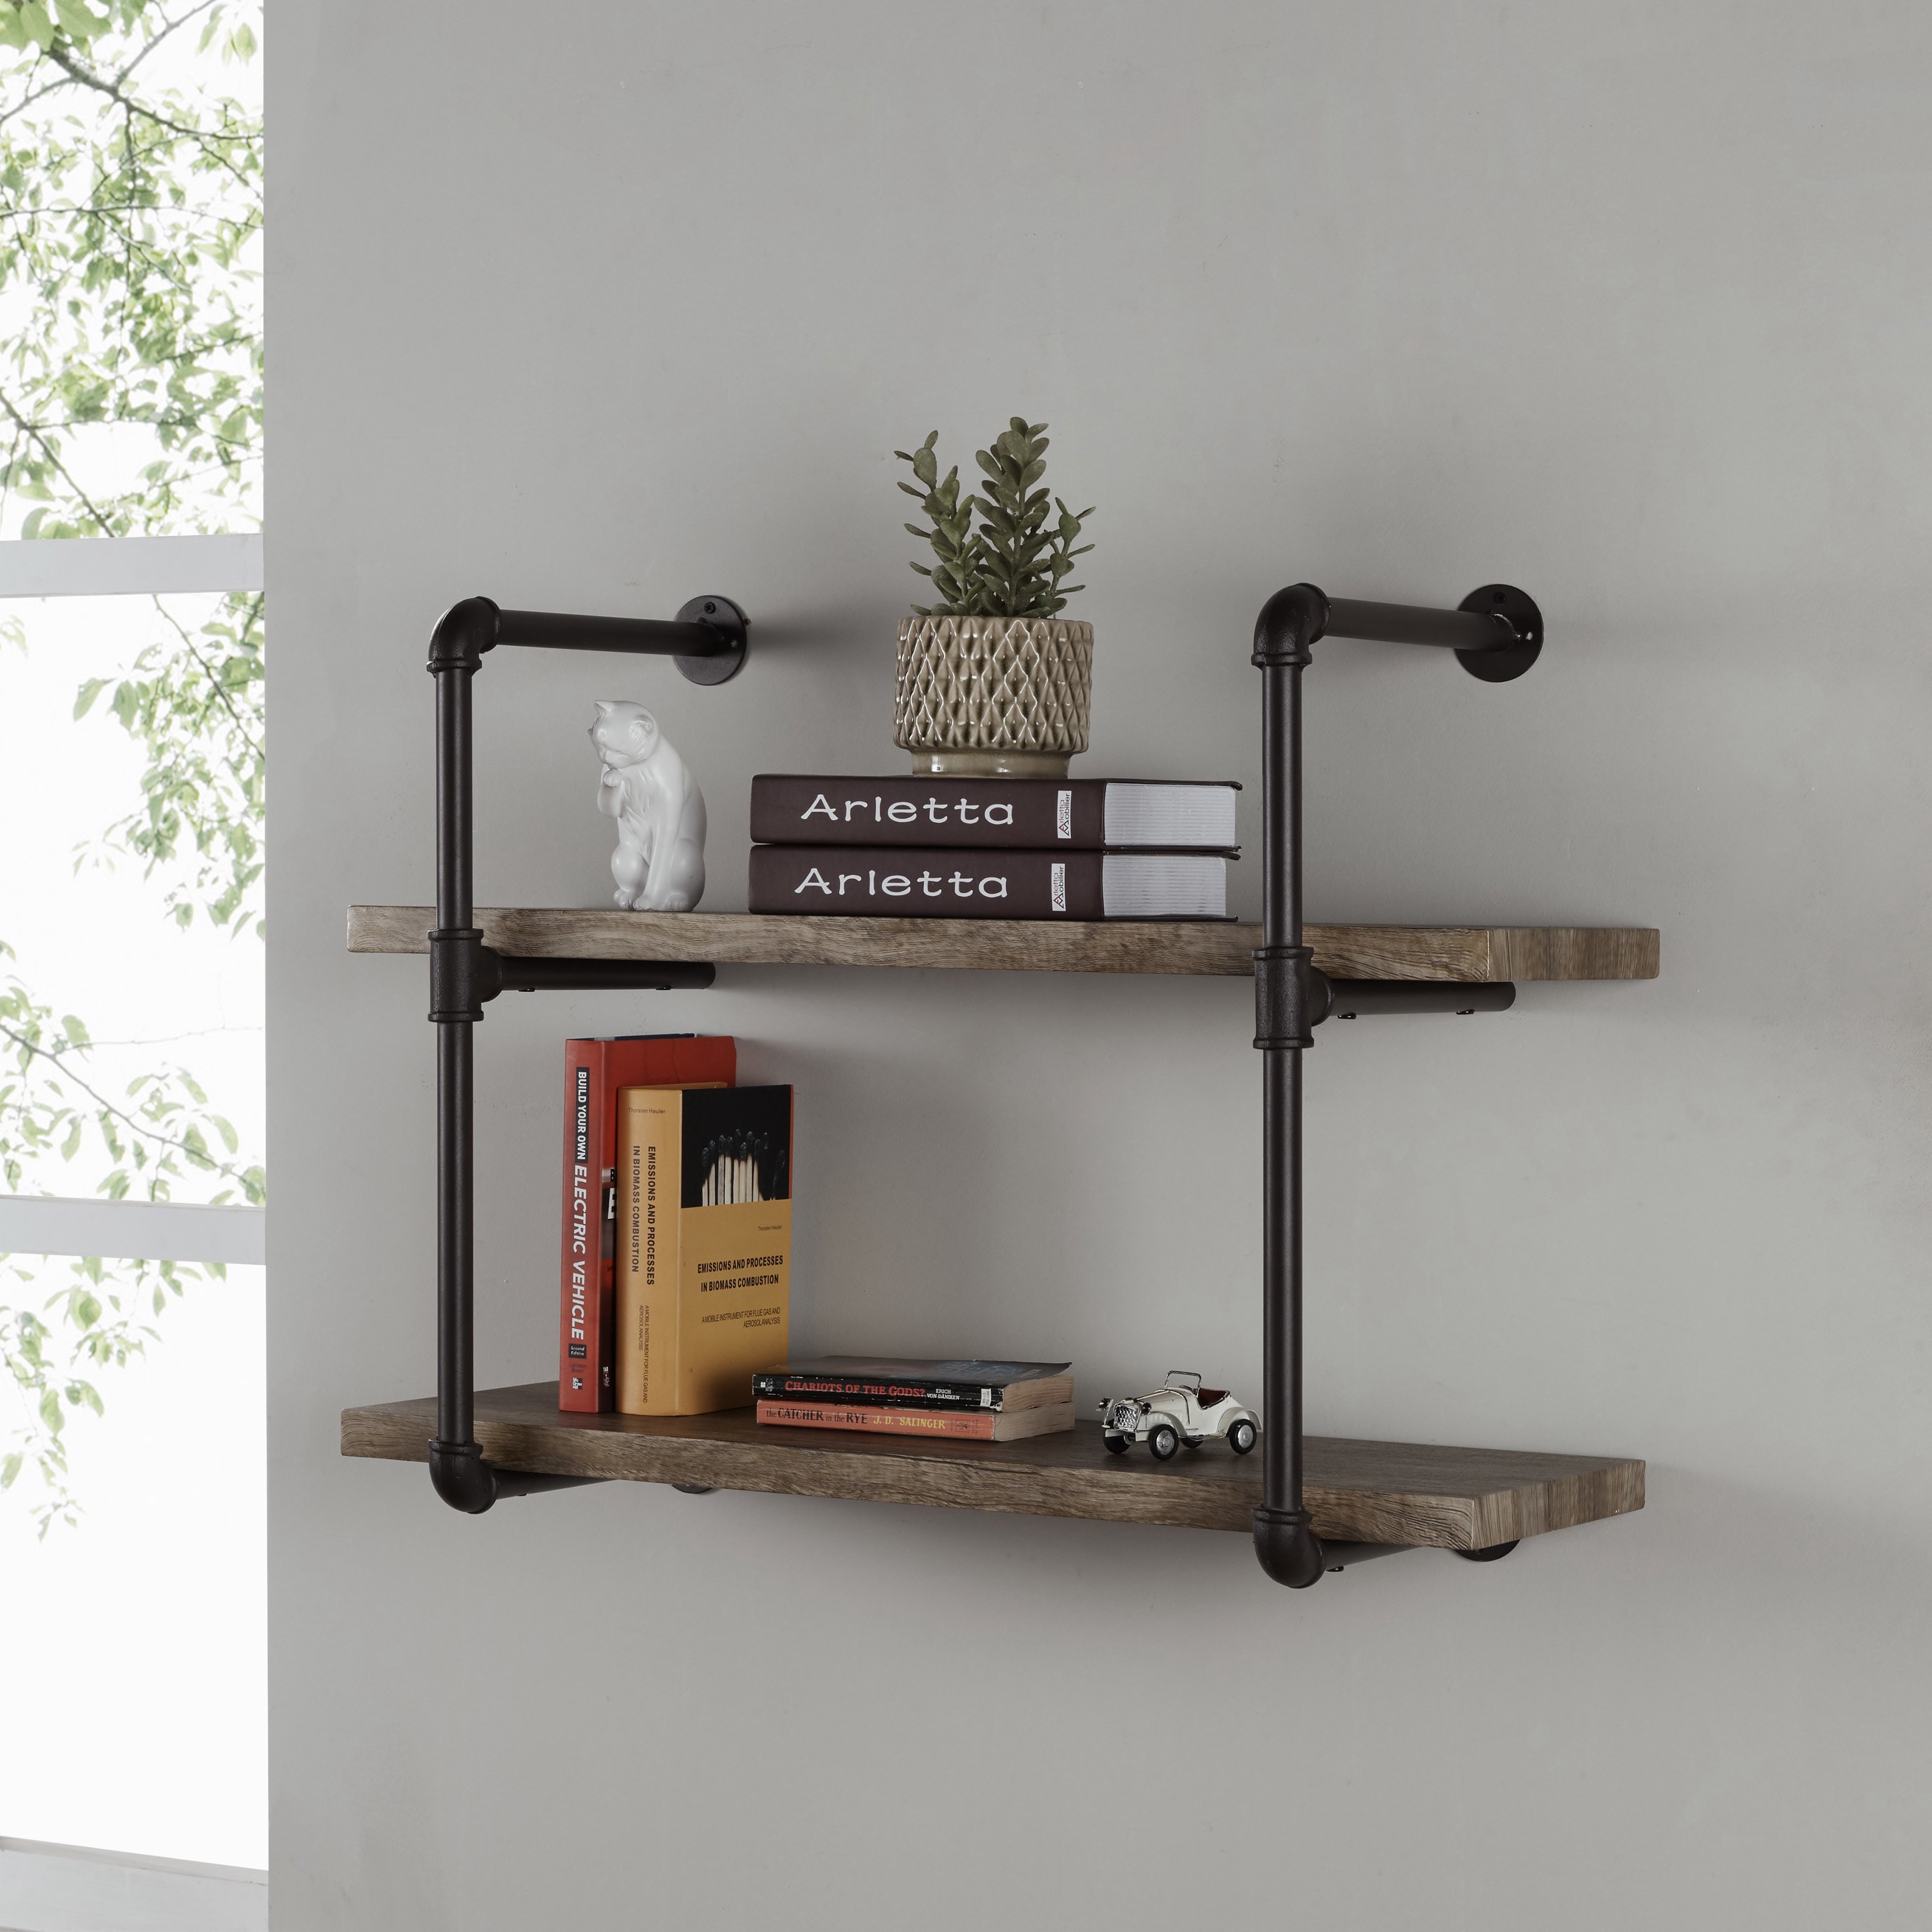 ping bedding furniture electronics jewelry clothing more danya three tier industrial pipe wall shelf floating shelves with pipes non screw ideas for dining room instead upper